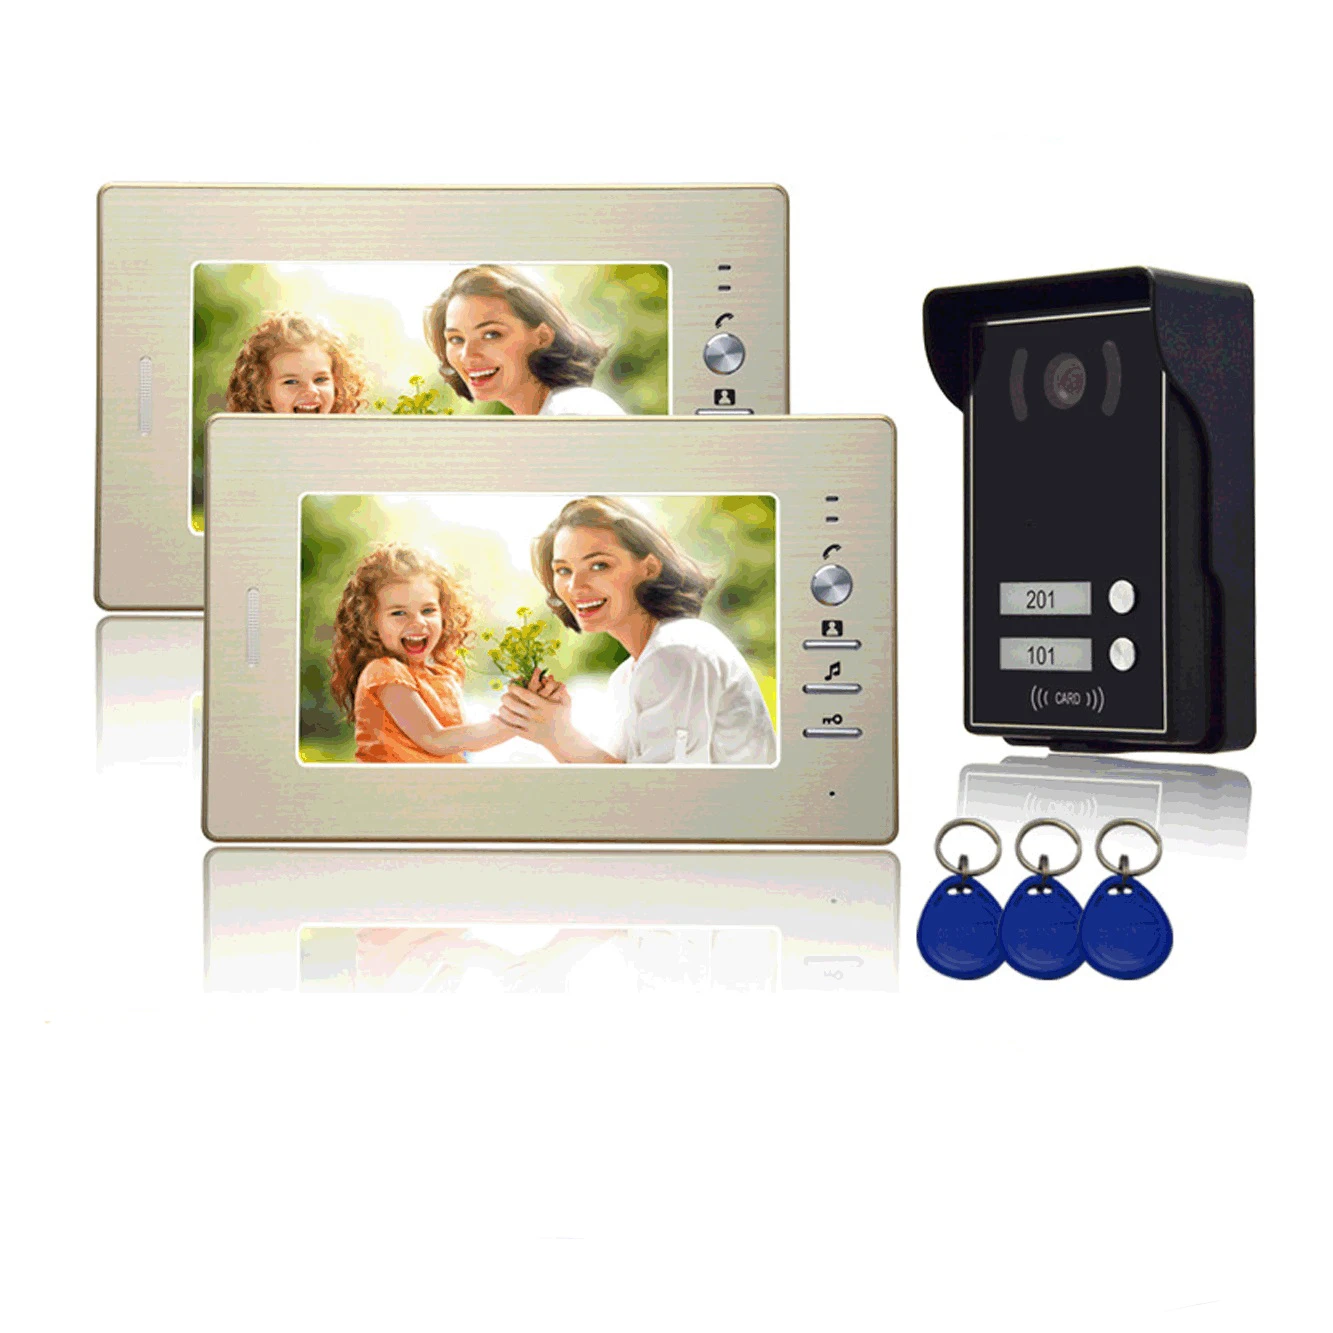 micron touch screen video intercom 2 Units Video Intercom Doorbell System Apartment 7 Inch Monitor RFID Access keyfobs Electric Lock Unlocking For 2 Family Houses video intercom system